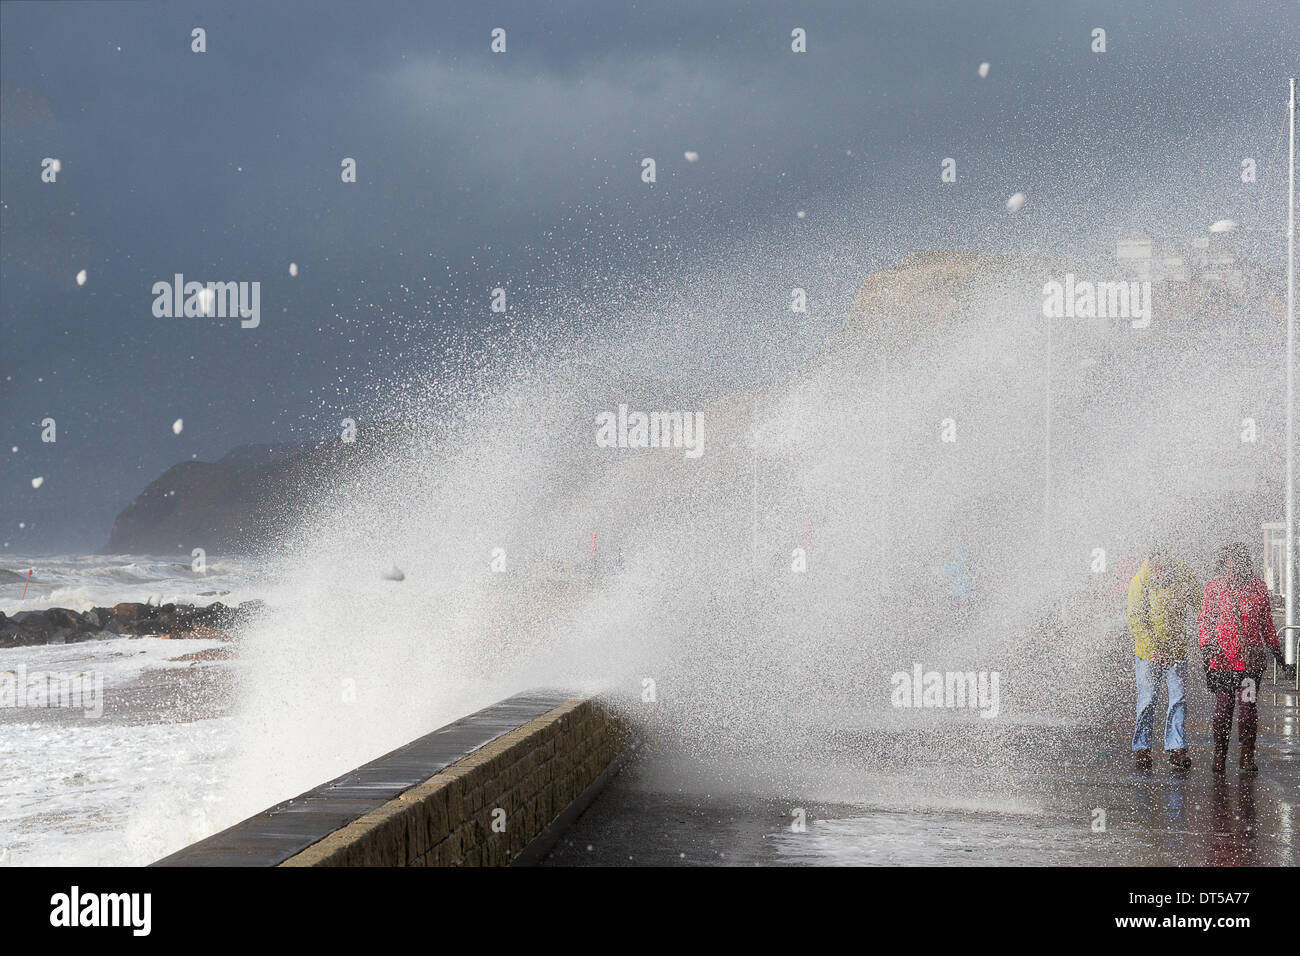 West Bay, Bridport, Dorset, United Kingdom at 13:12 hrs on 8th Feb 2014. During ferocious storms waves broke over the sea wall at high tide, throwing debris onto the sea front and drenching adventurous onlookers.  The extreme conditions were brought about by one of a continuing string of low pressure systems bringing associated high winds and weather fronts. Credit:  Living Levels Photography/Alamy Live News Stock Photo